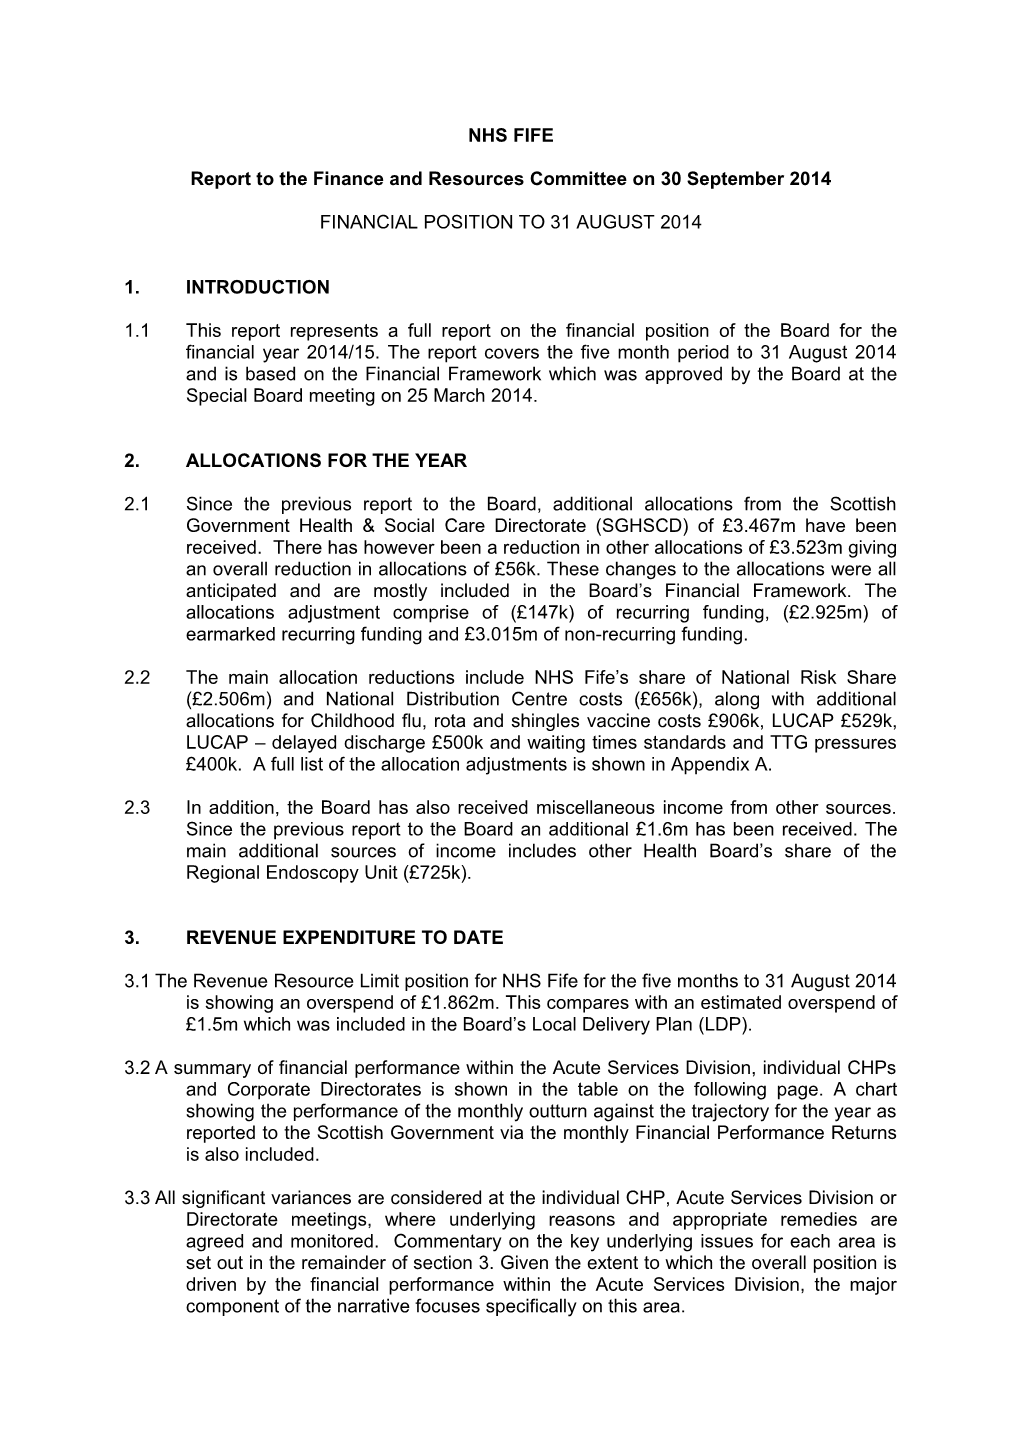 Report to the Finance and Resources Committee on 30 September 2014